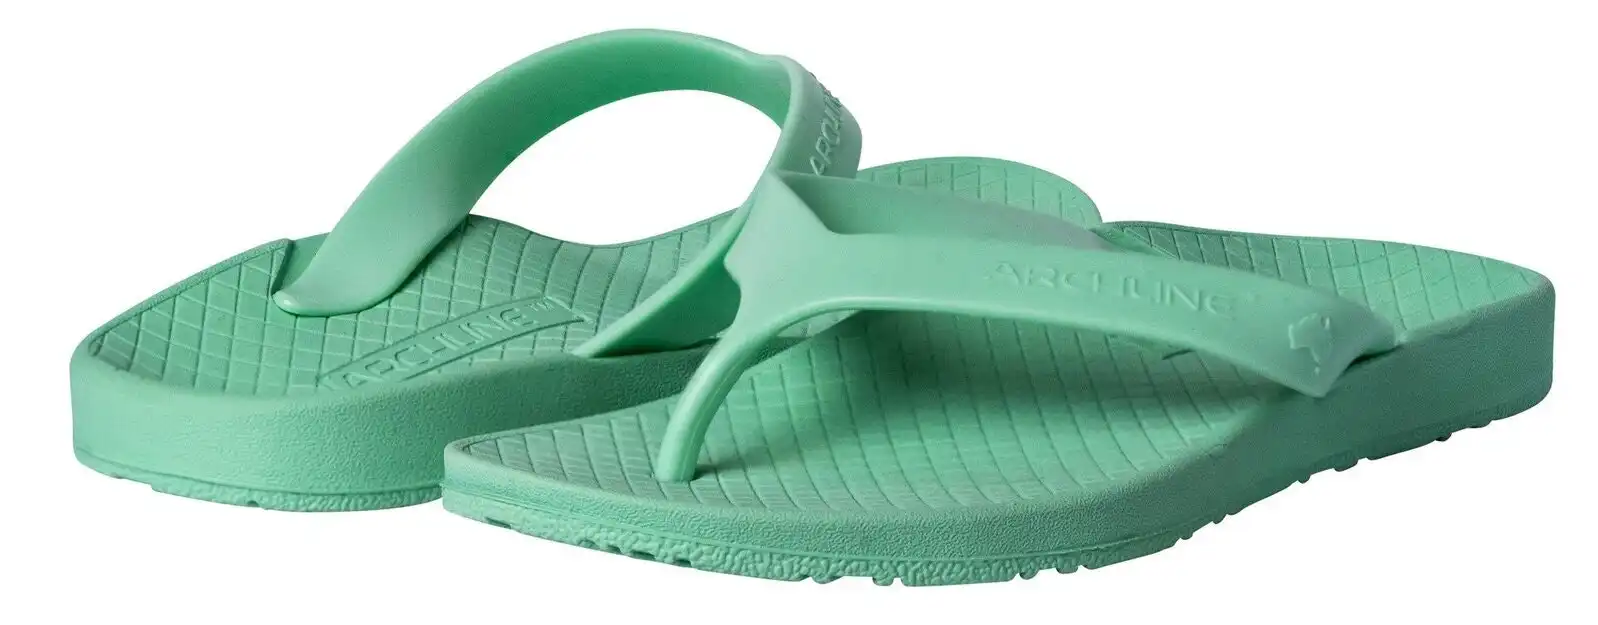 Archline Orthotic Thongs Arch Support Shoes Footwear Flip Flops - Dew Green